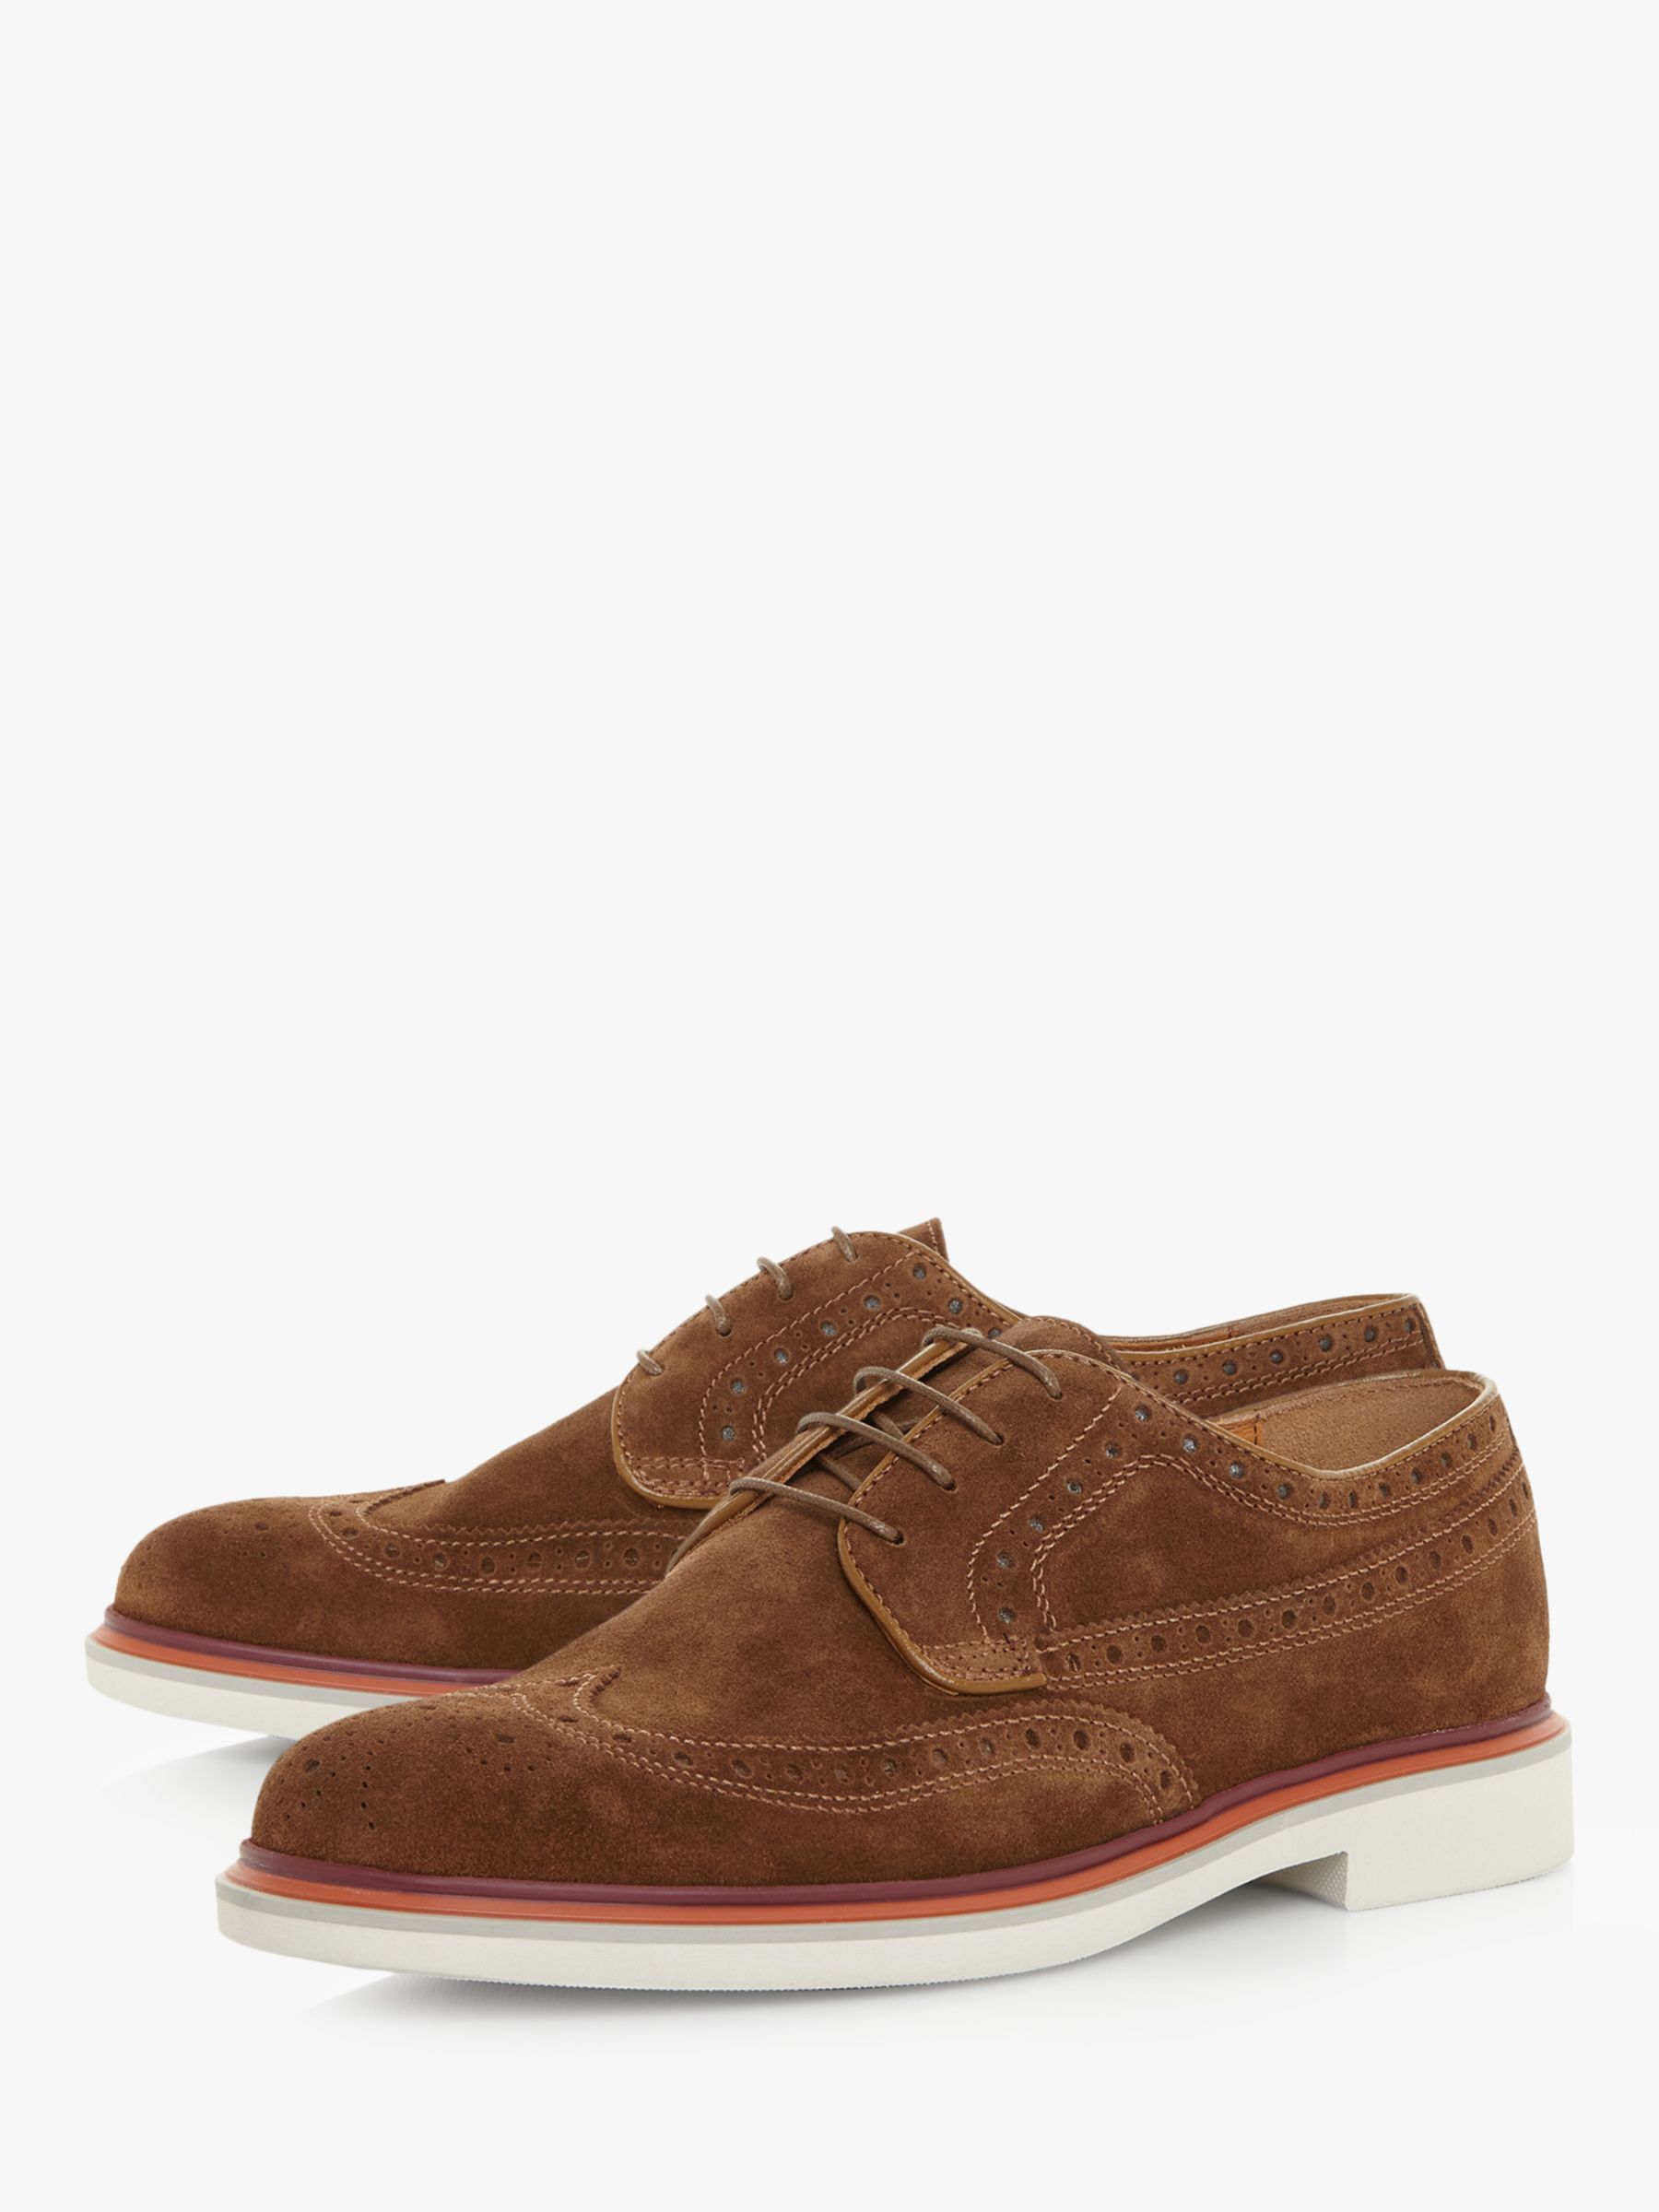 Dune Bionic Suede Contrast Sole Lace Up Brogues